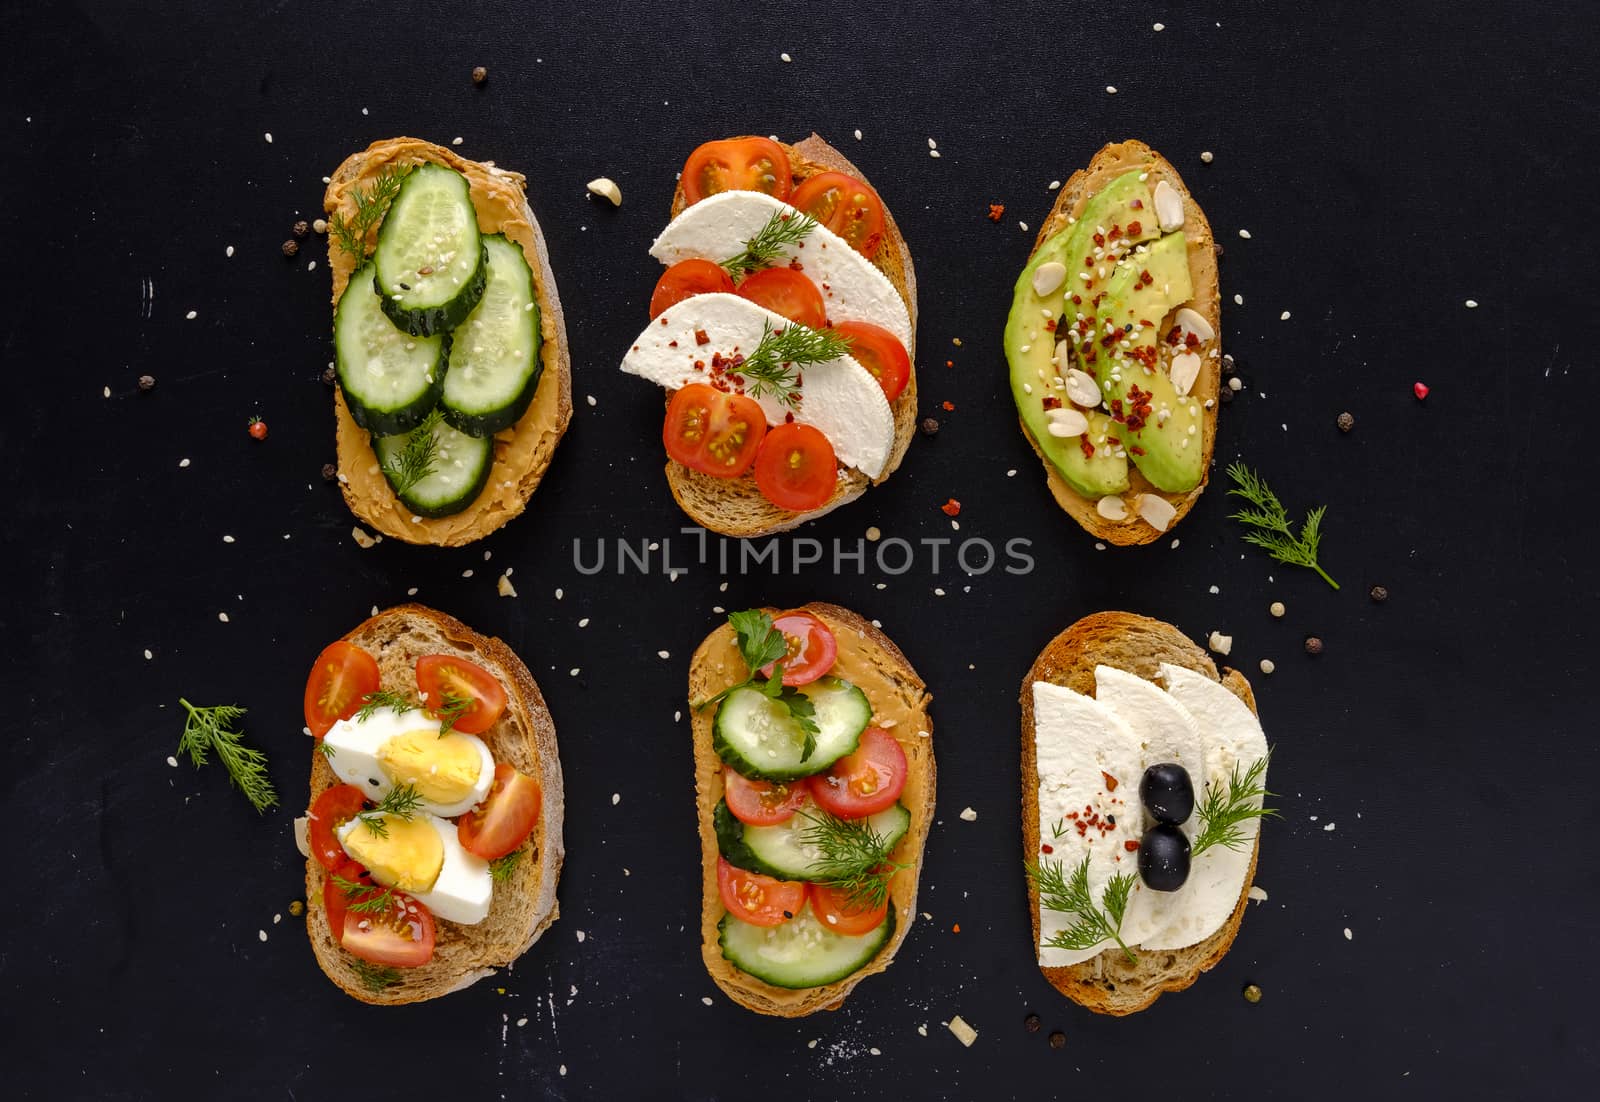 Set of fresh sandwiches snacks on dark bread with cheese, tomatoes, cucumber, boiled eggs and avocado, viewed from above on black background, decorated with greens and spices